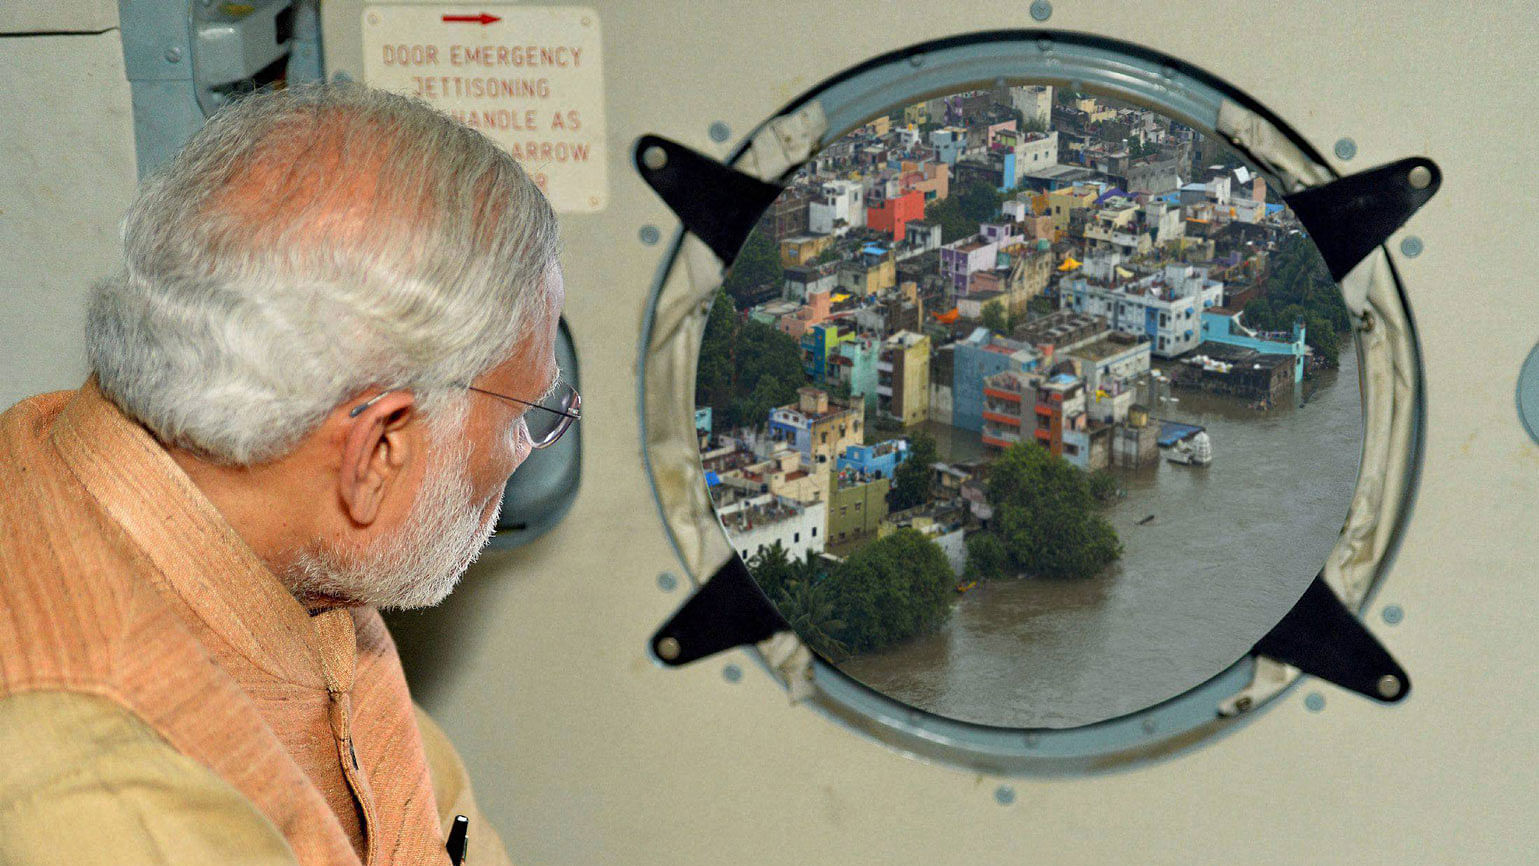 

This Photoshopped image of PM Modi on a flood survey was tweeted by PIB on Dec 3, 2015. (Photo: PTI)